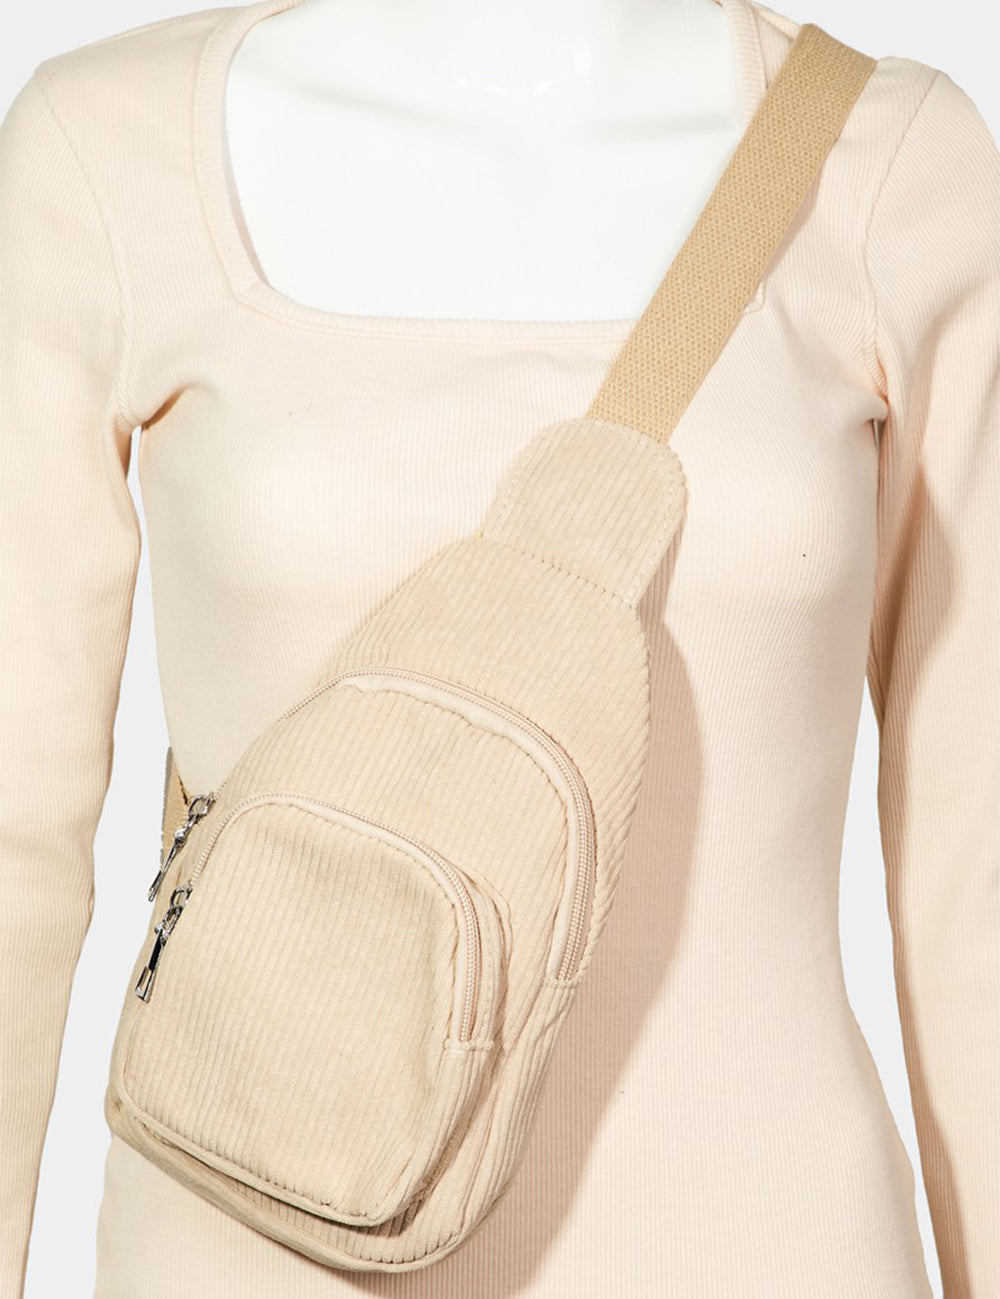 Fame Double-Layered Sling Bag